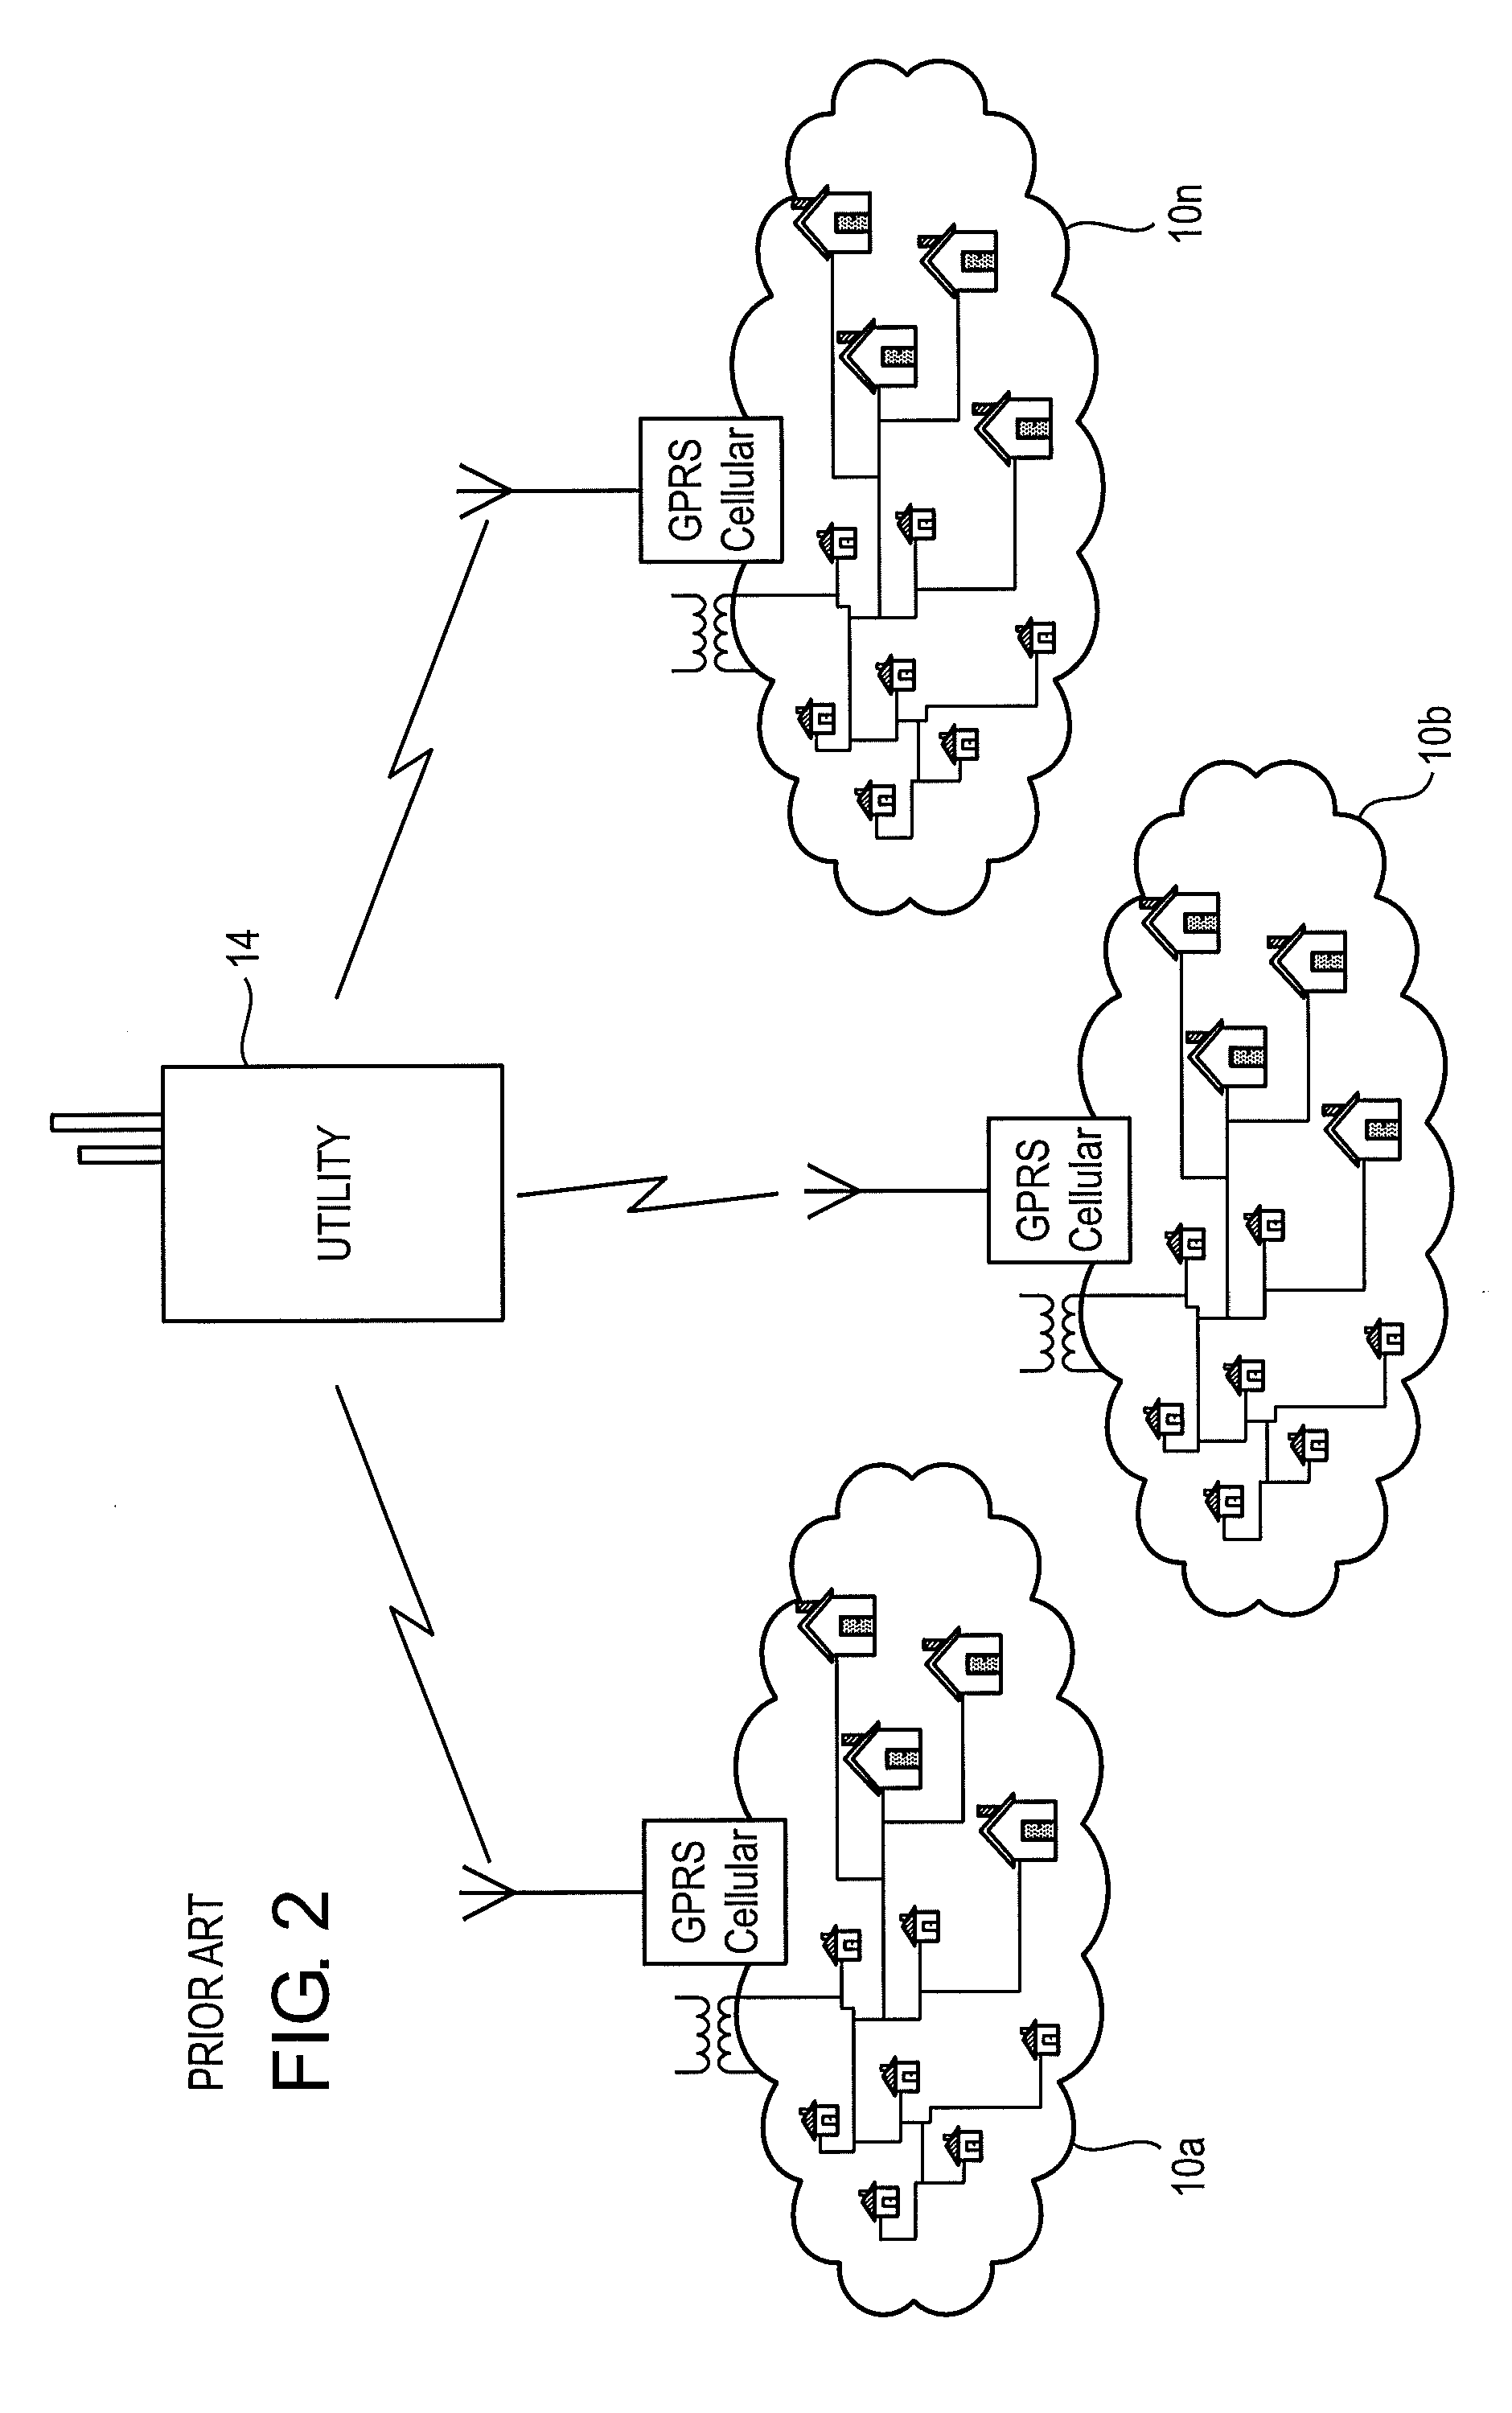 Meshed networking of access points in a utility network